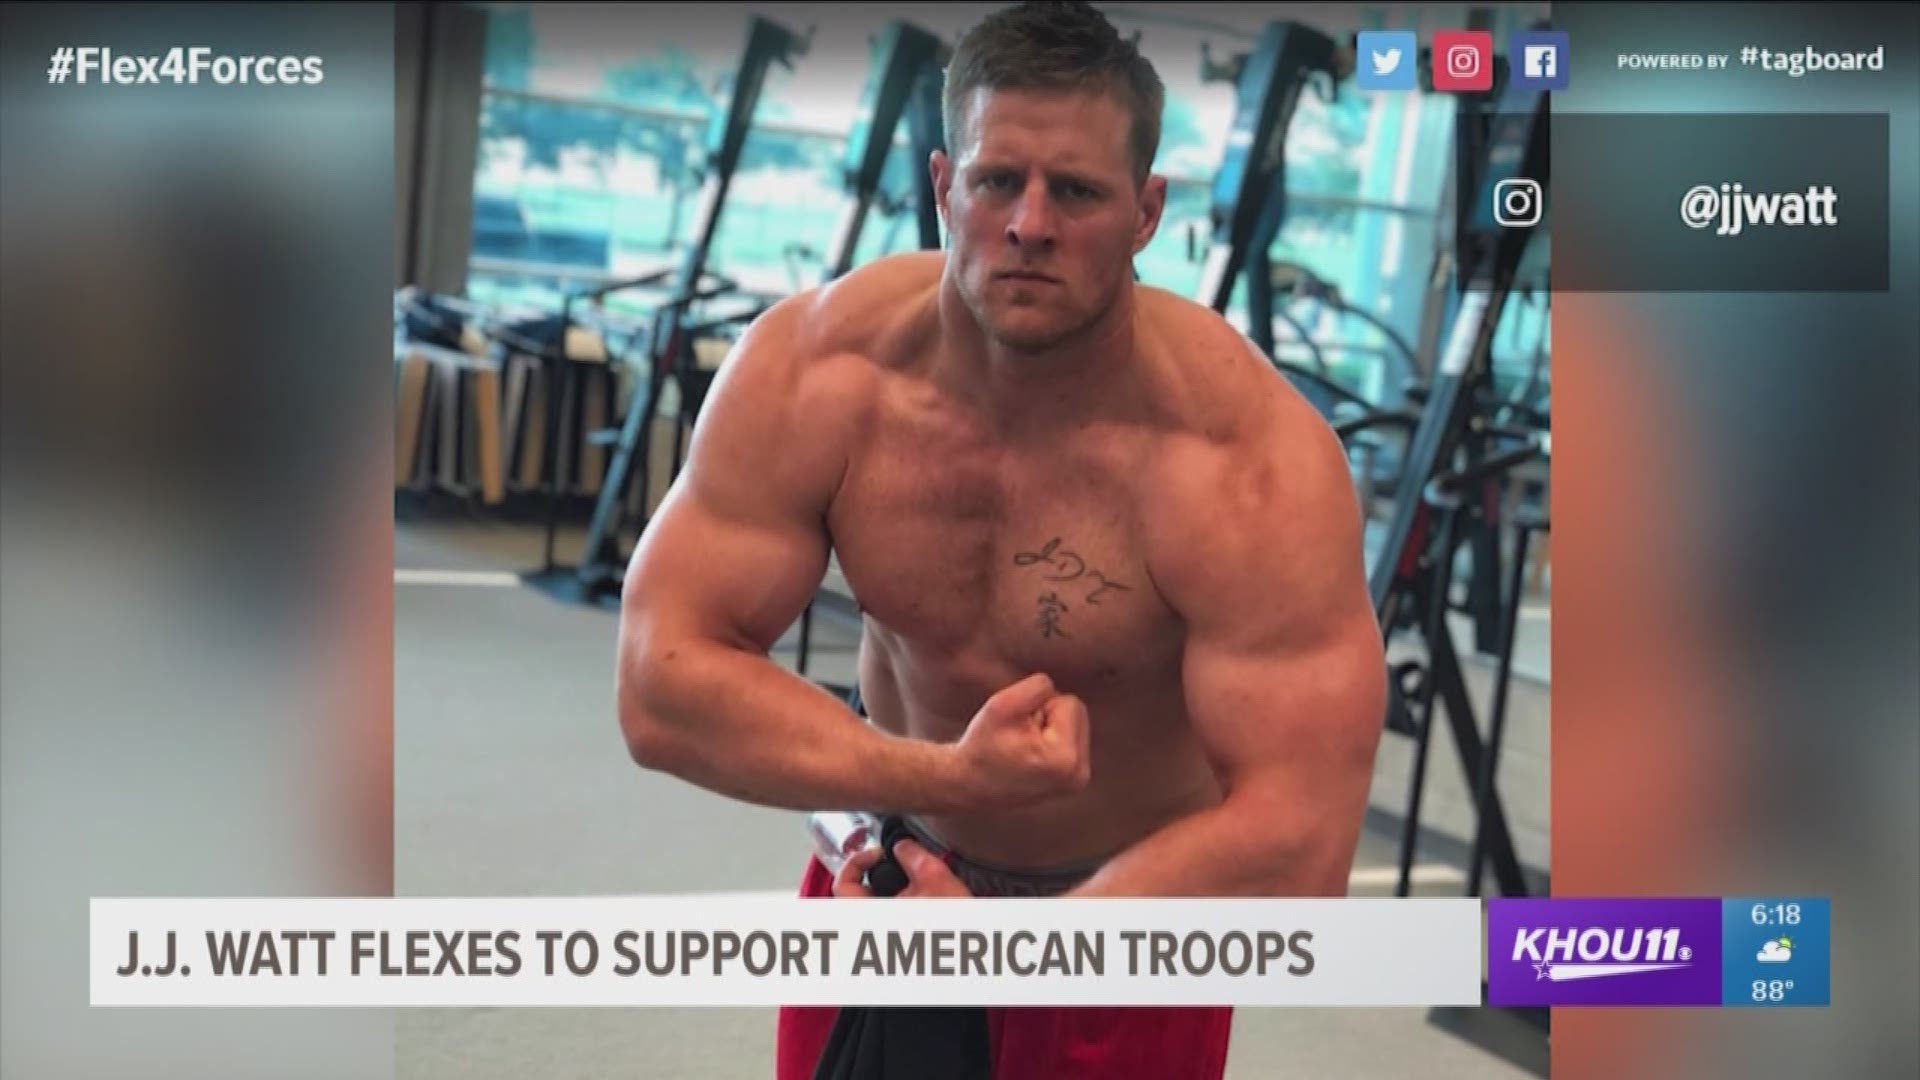 Ladies, have you seen this? No. 99 is showing off his Texas-sized muscles for "Flex 4 Forces."